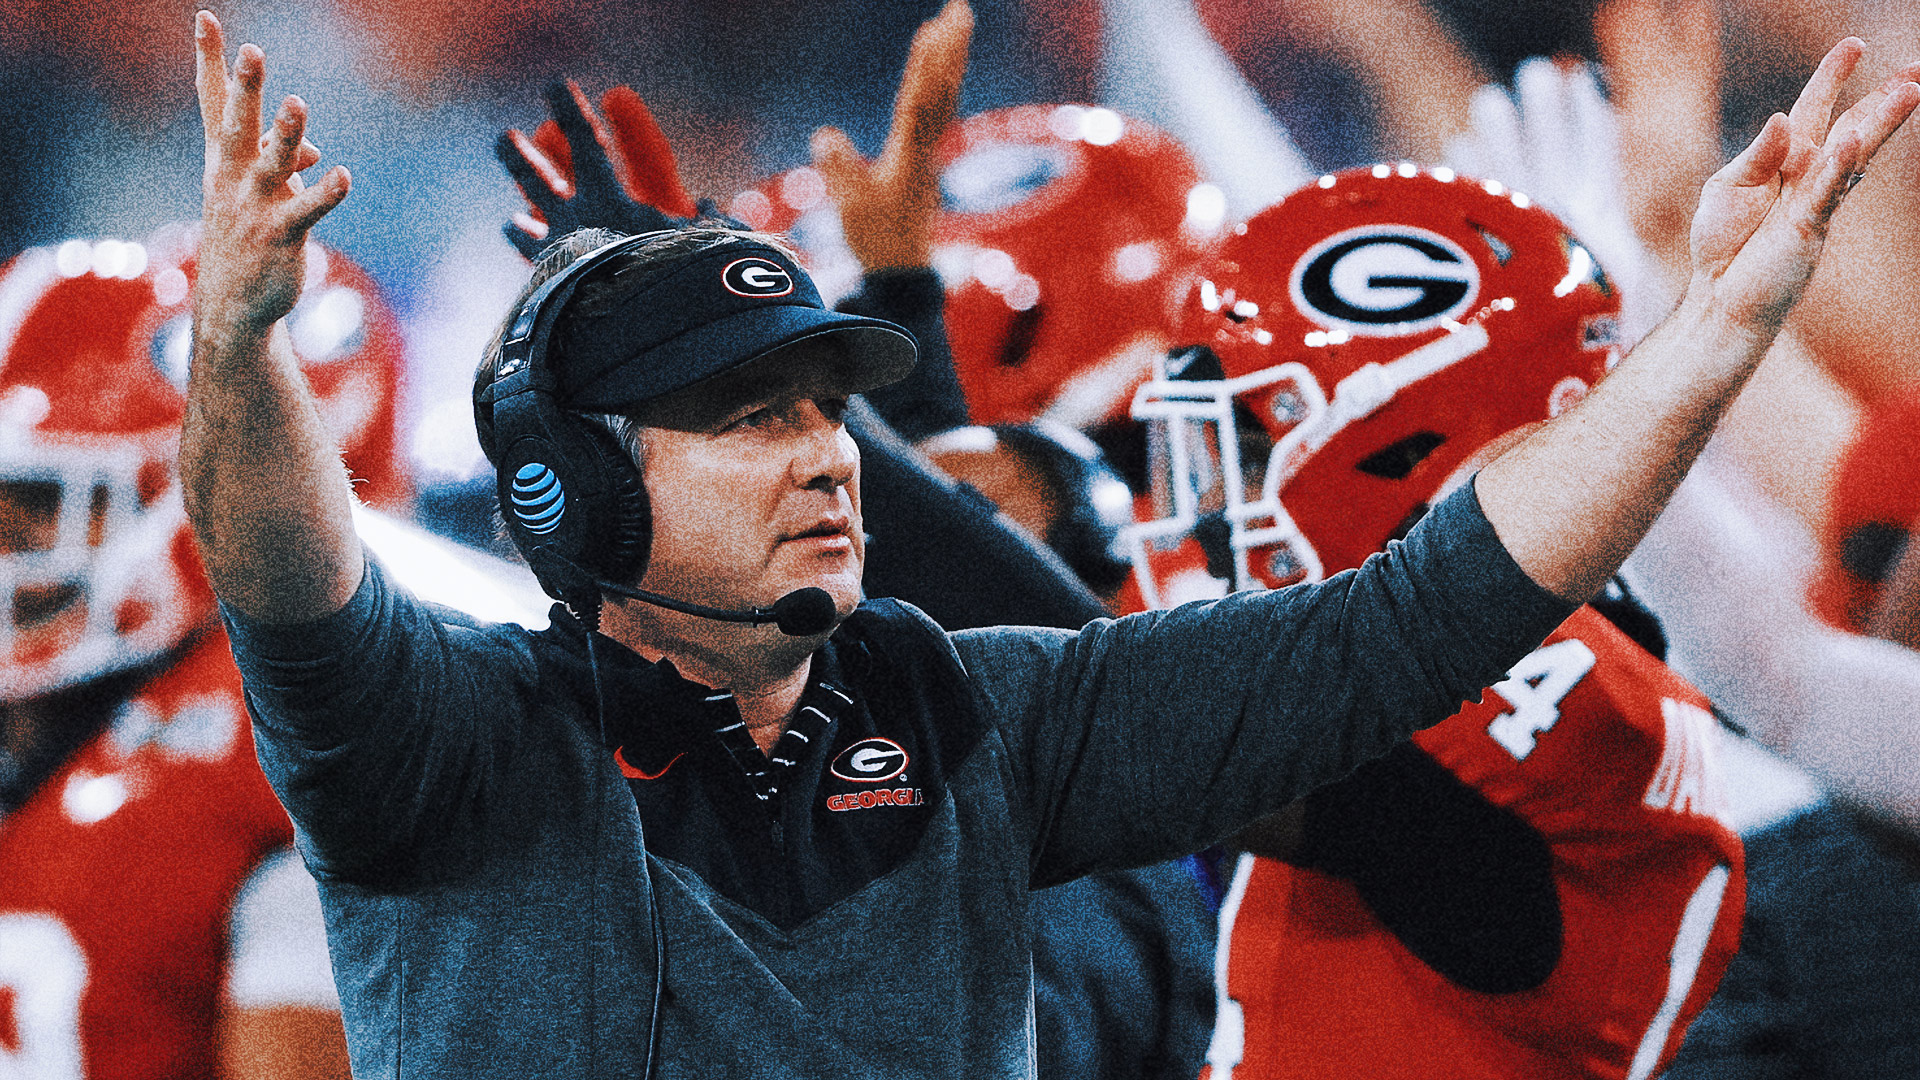 Georgia's dominant CFP title win sends message: 'We run the sport now'